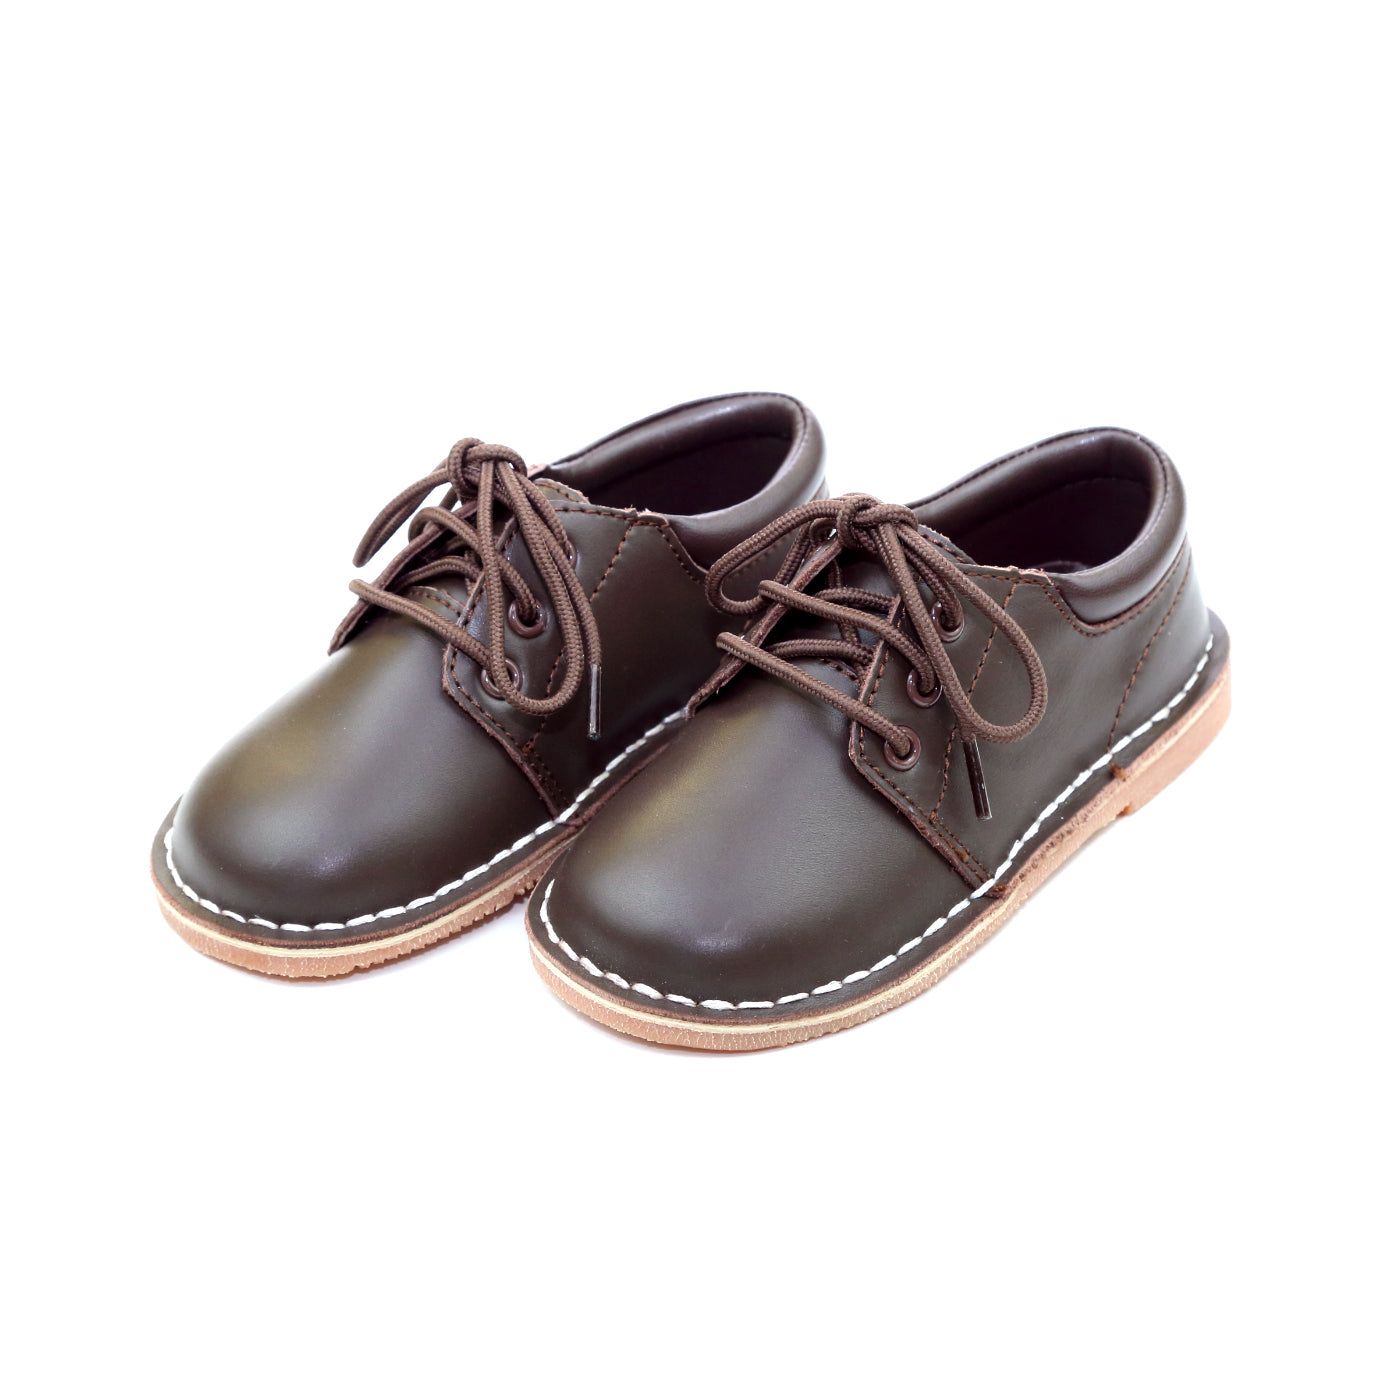 Tyler is a beautiful lace up shoe finely crafted from smooth leather, with functional matching lace front and stitch down construction. An absolutely handsome shoe for boys, this is our favorite shoe of choice for school, casual and dressy occasions.  Smooth leather upper Matching laces Stitch down construction Breathable leather lining